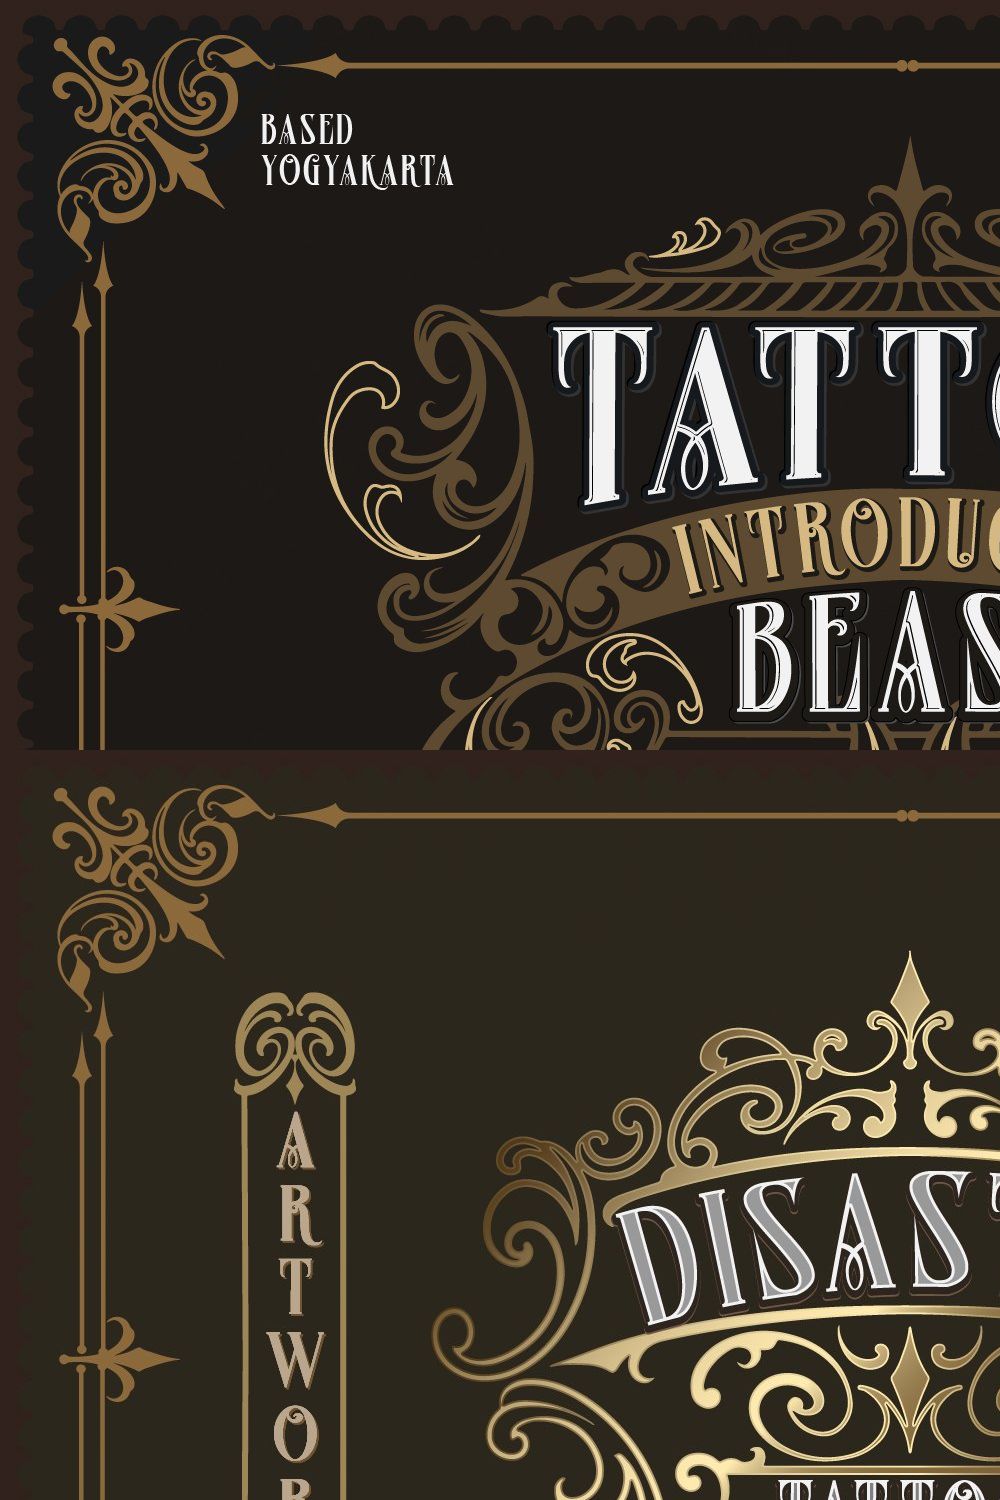 Tattoo Beast + Decorative pinterest preview image.